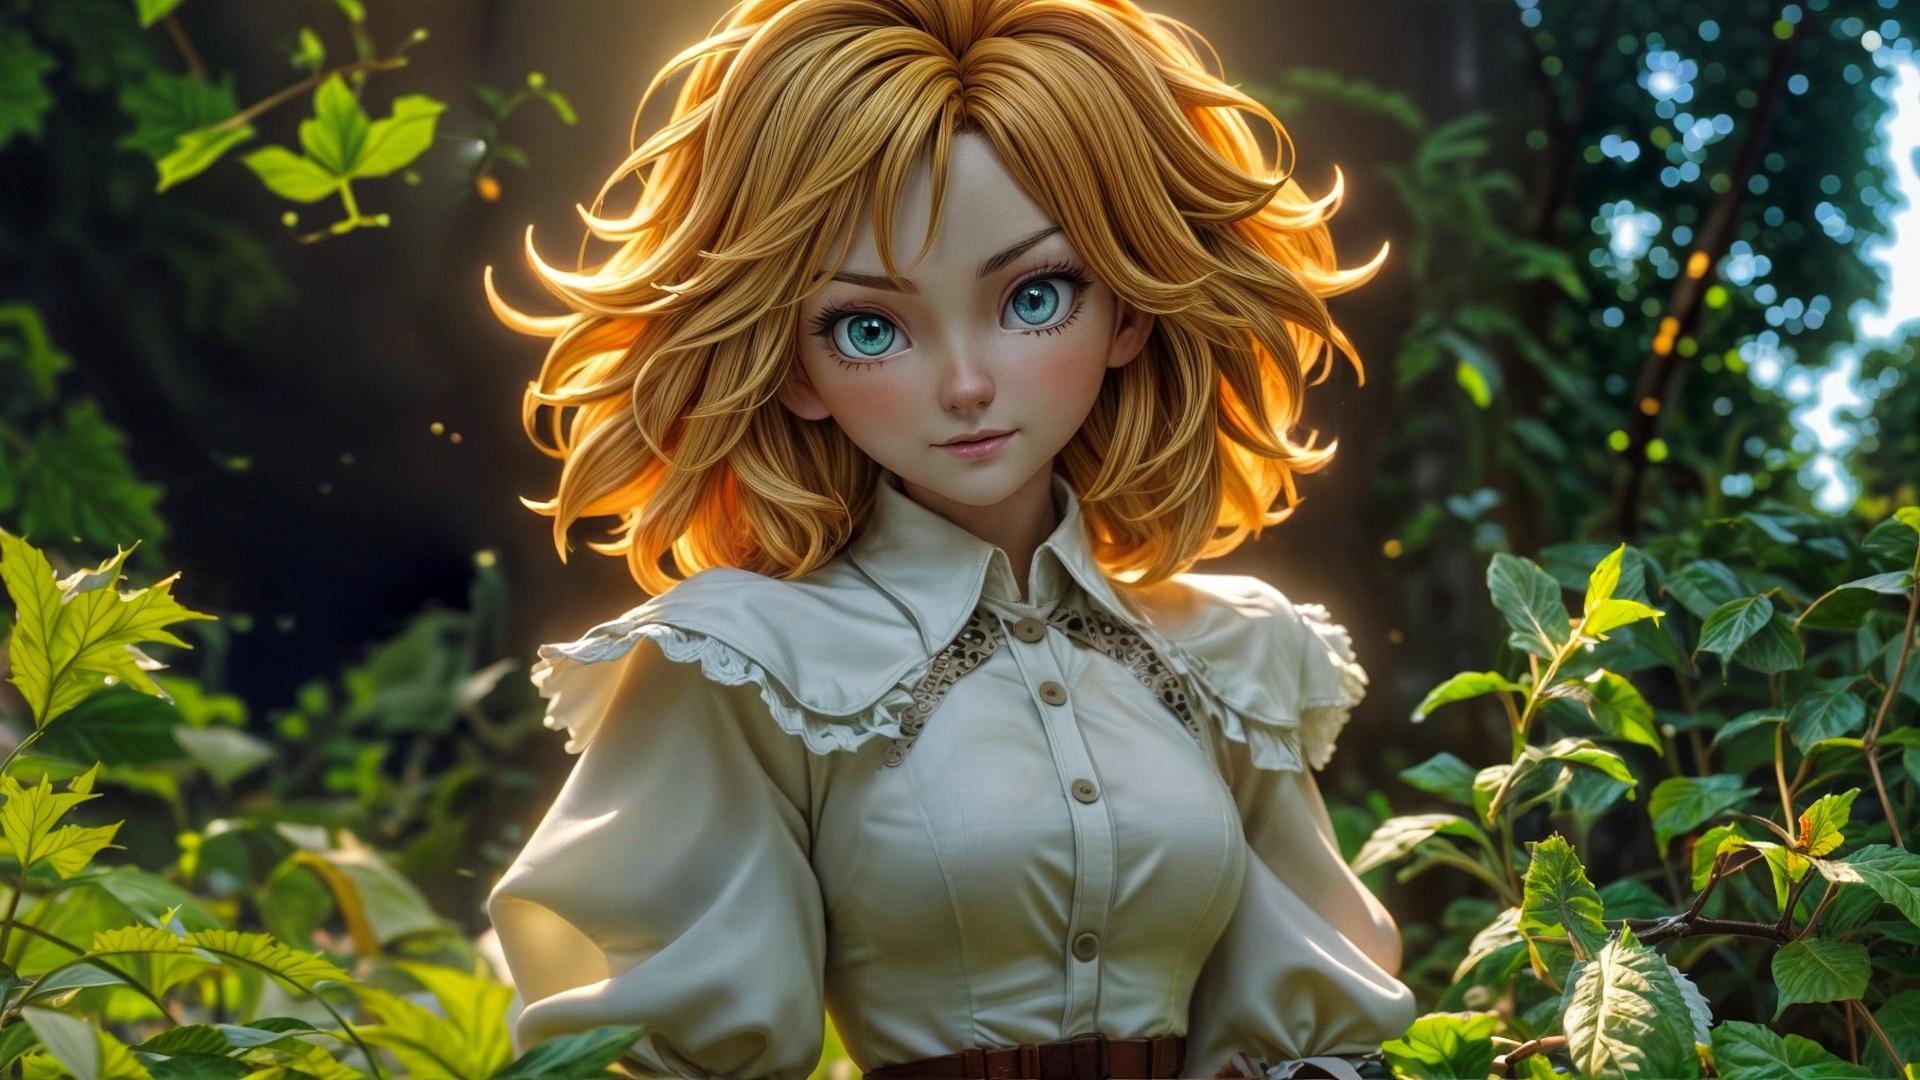 Portrait of a girl in a white blouse against the background of a forest